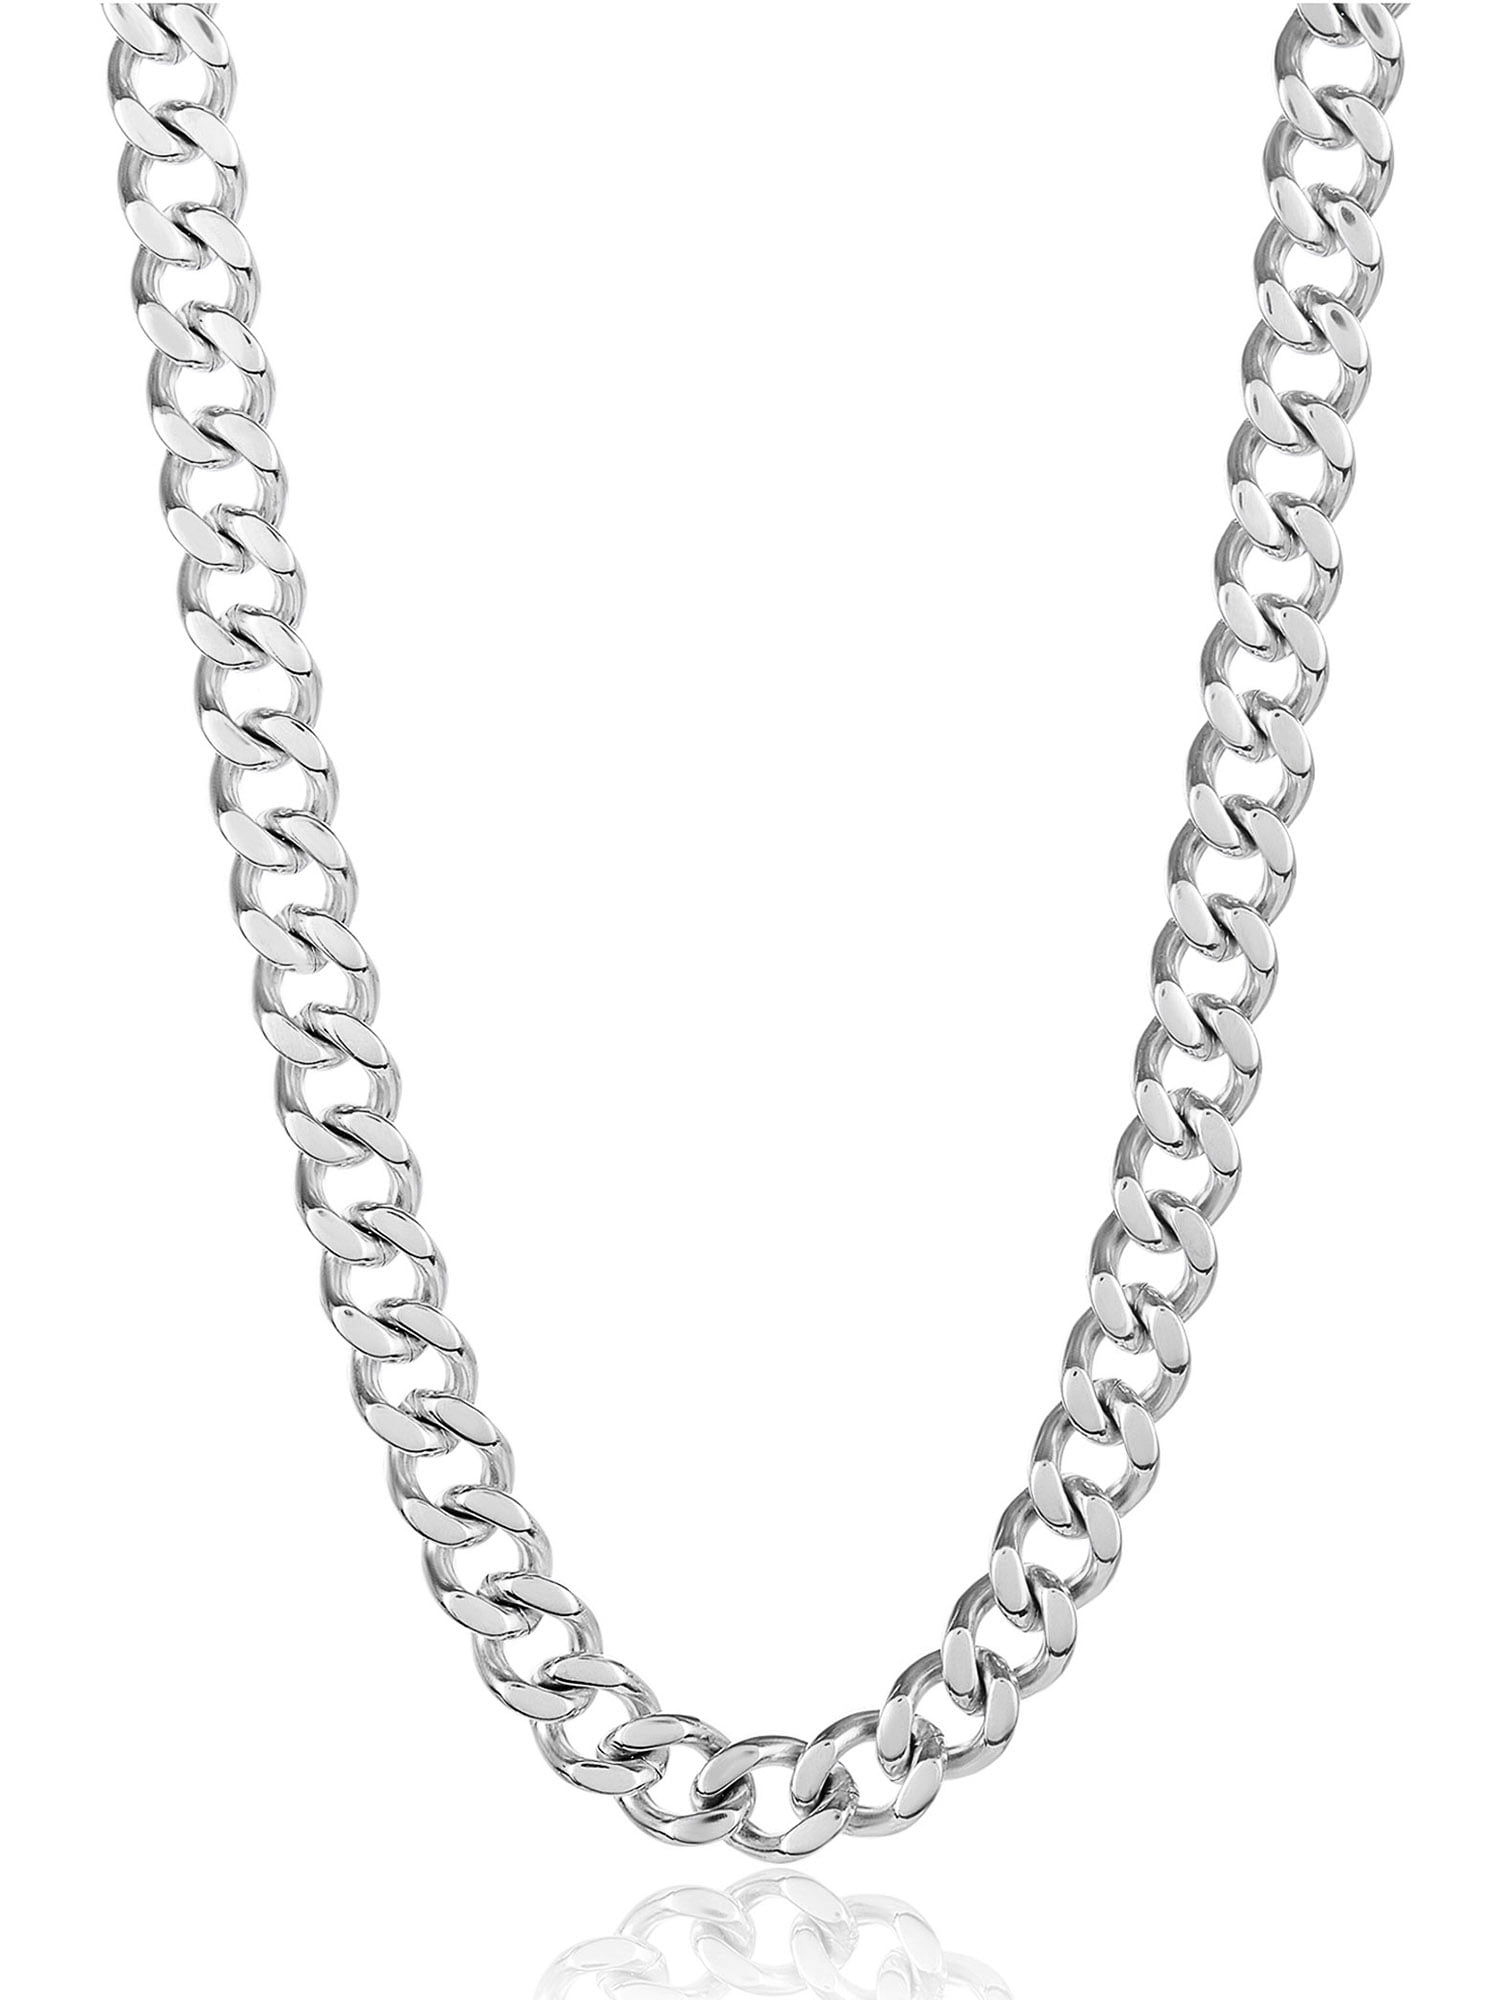 Bishilin Stainless Steel Fashion Men Women Necklace Pendant Necklace Chunky Link Silver Fit 24Inch